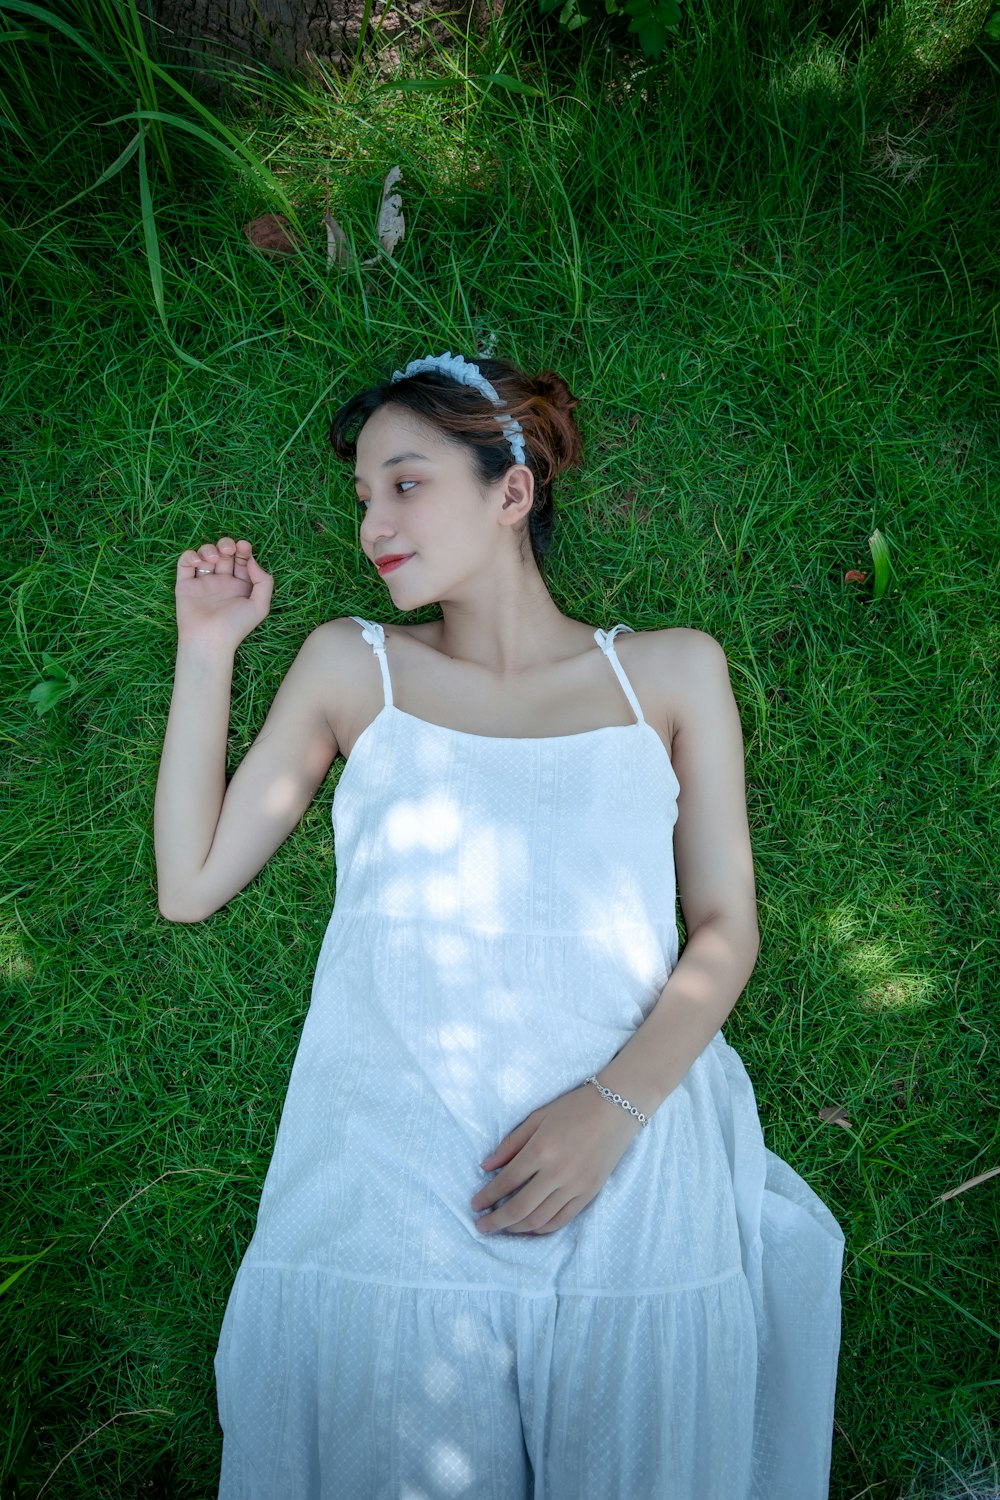 woman in white spaghetti strap dress lying on green grass field during daytime